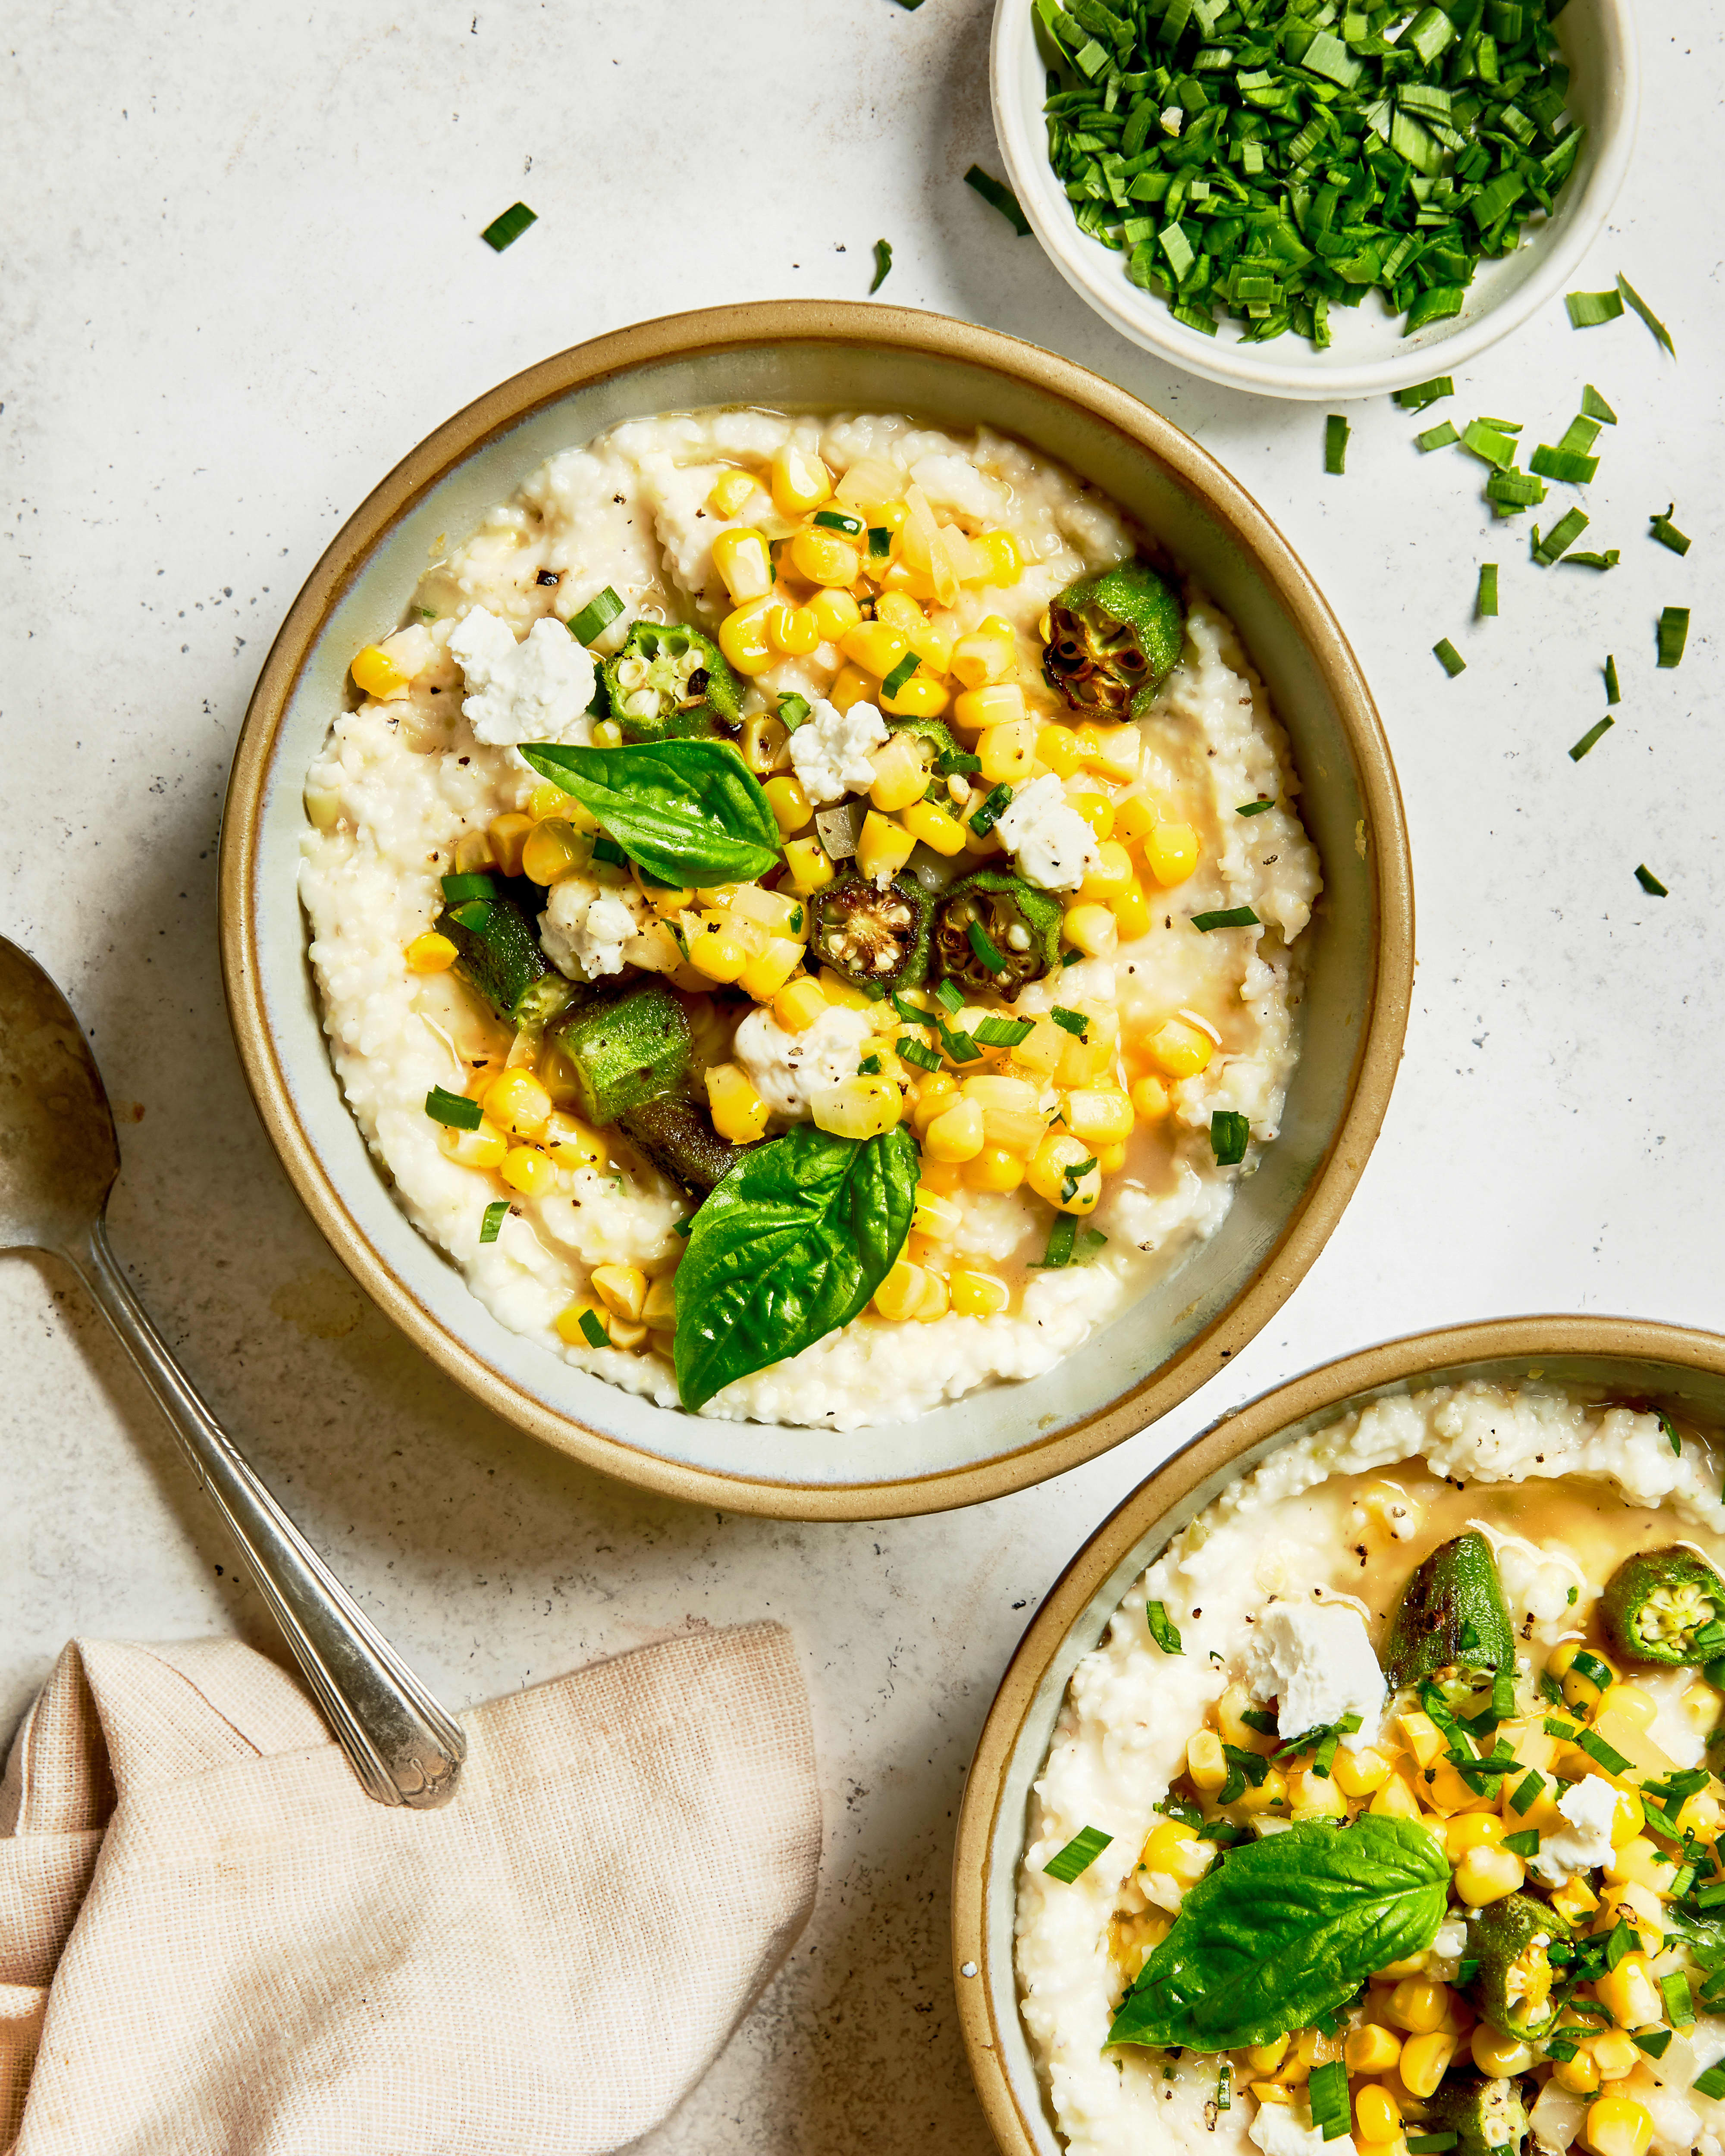 Brittany Conerly S Southern Style Grits With Okra Corn And Goat Cheese Kitchn